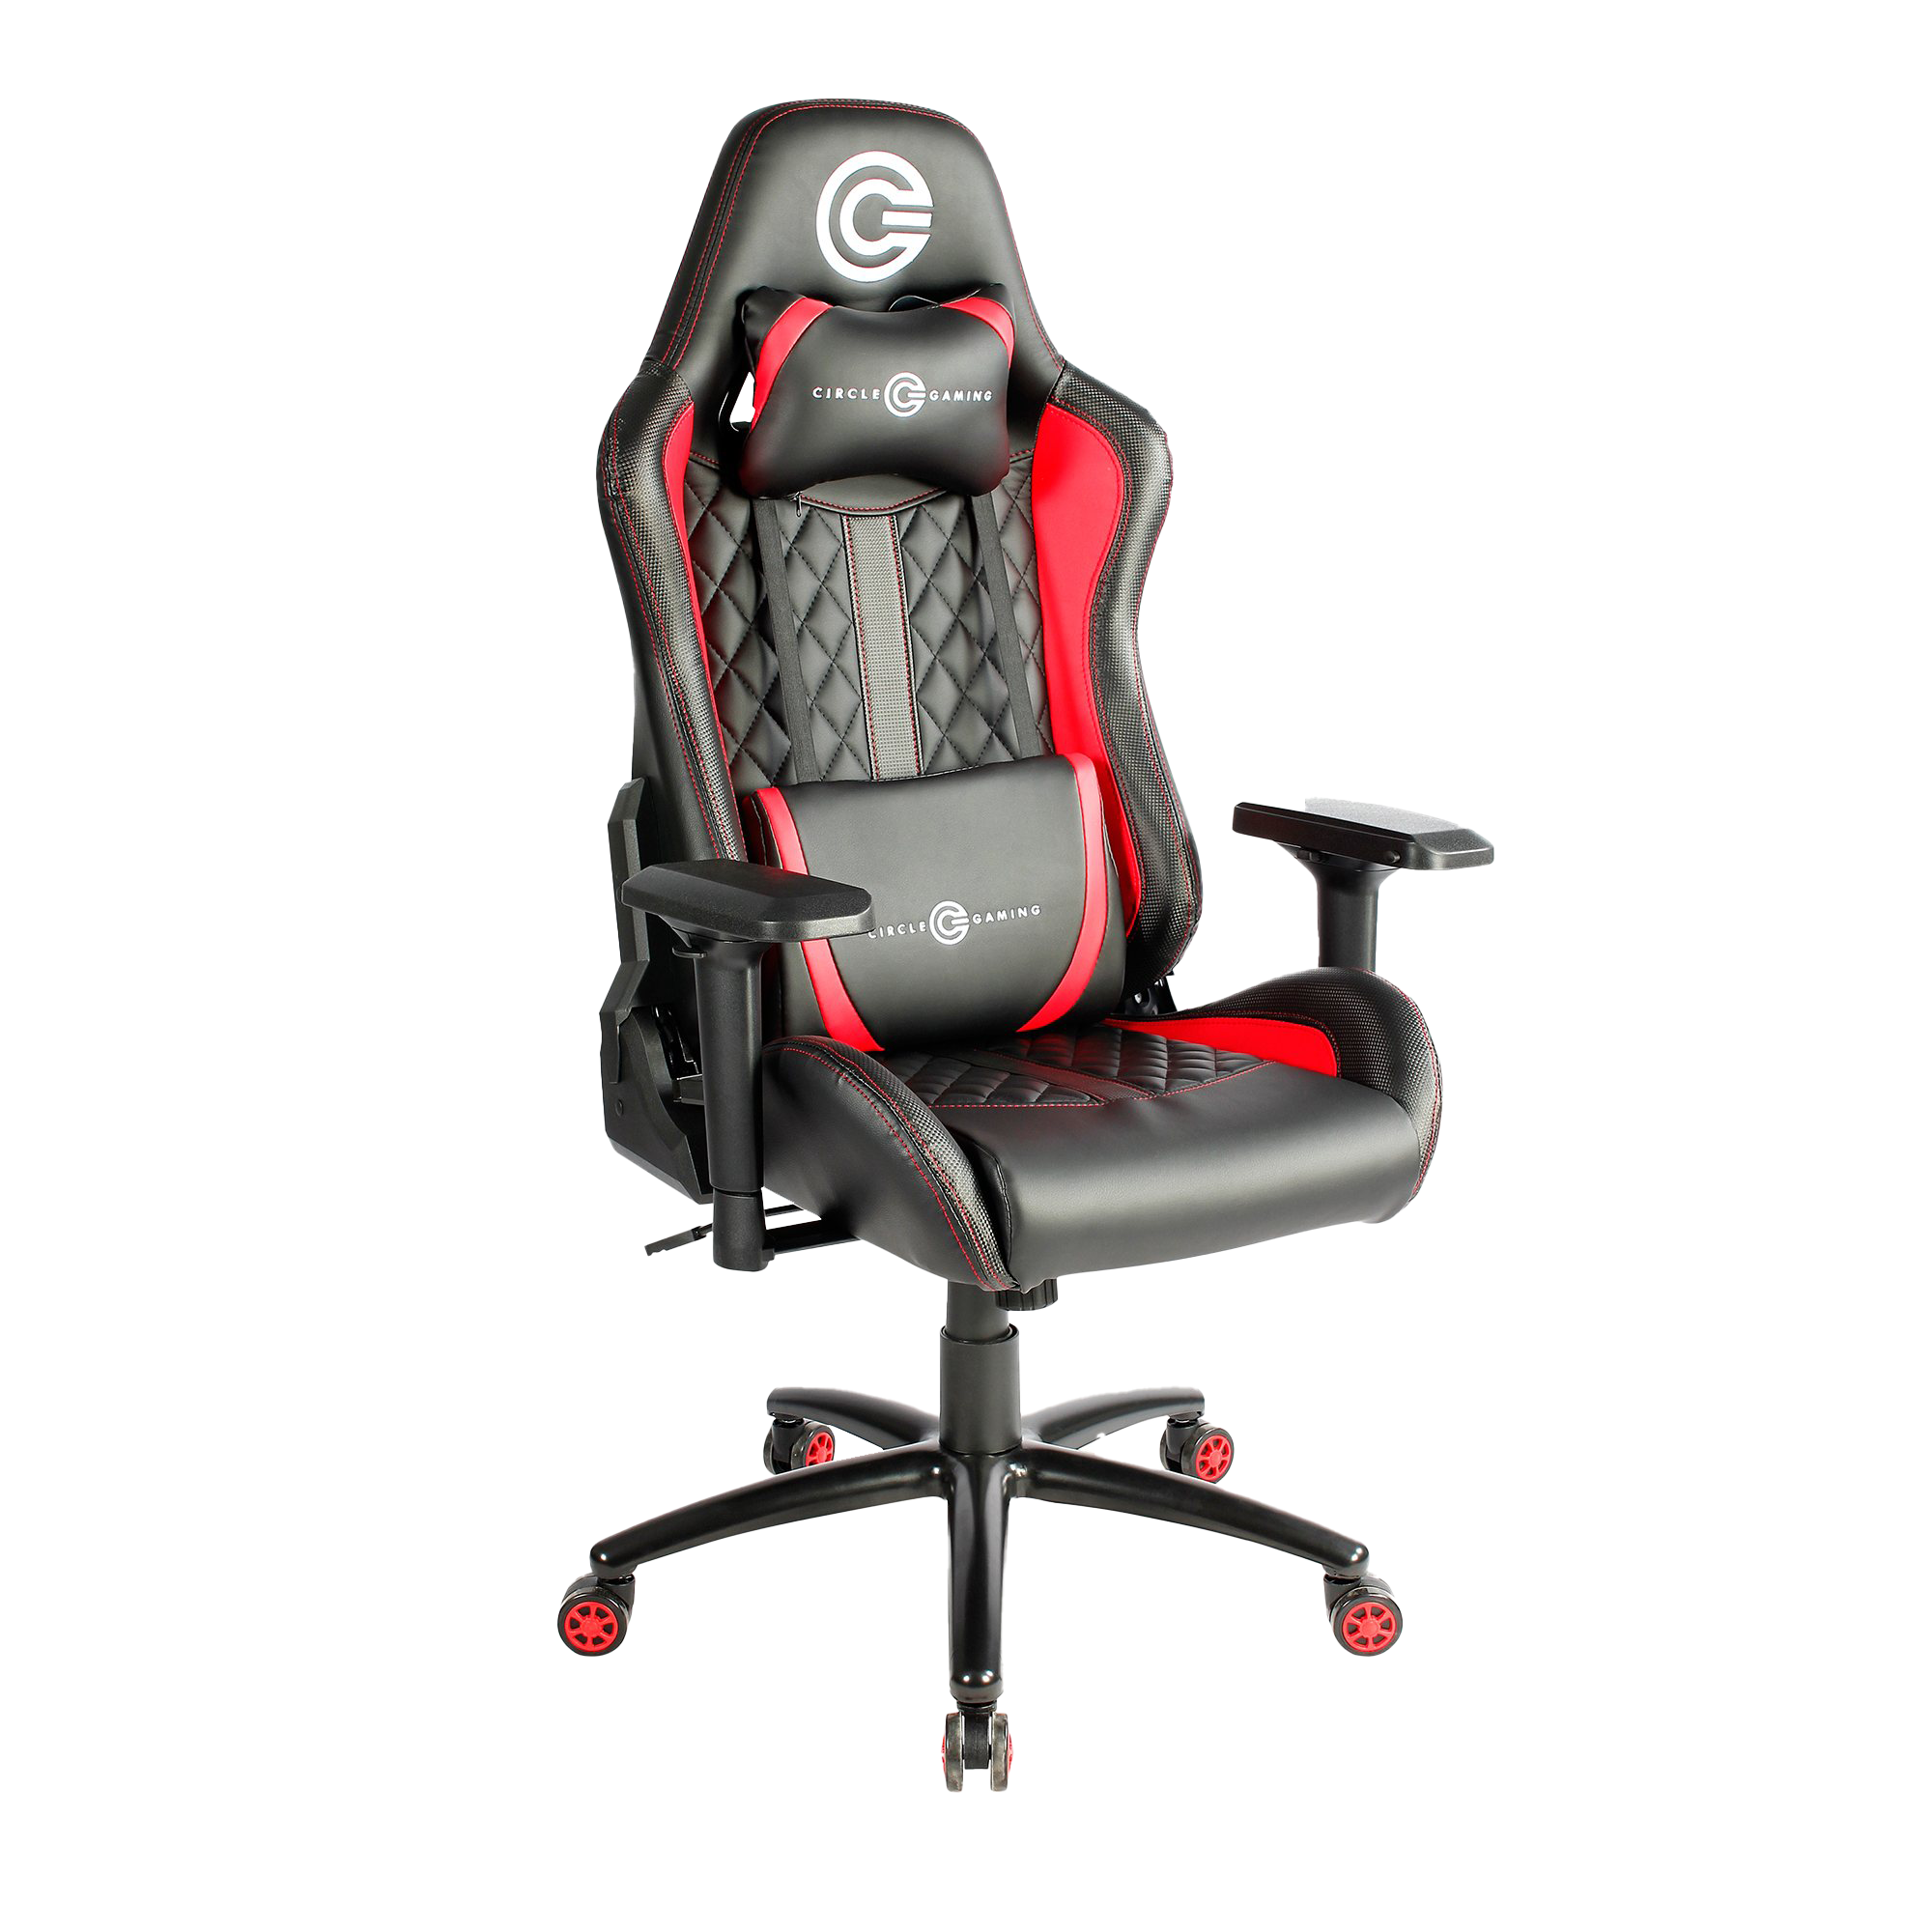 Red Gaming Chair PNG Image Background